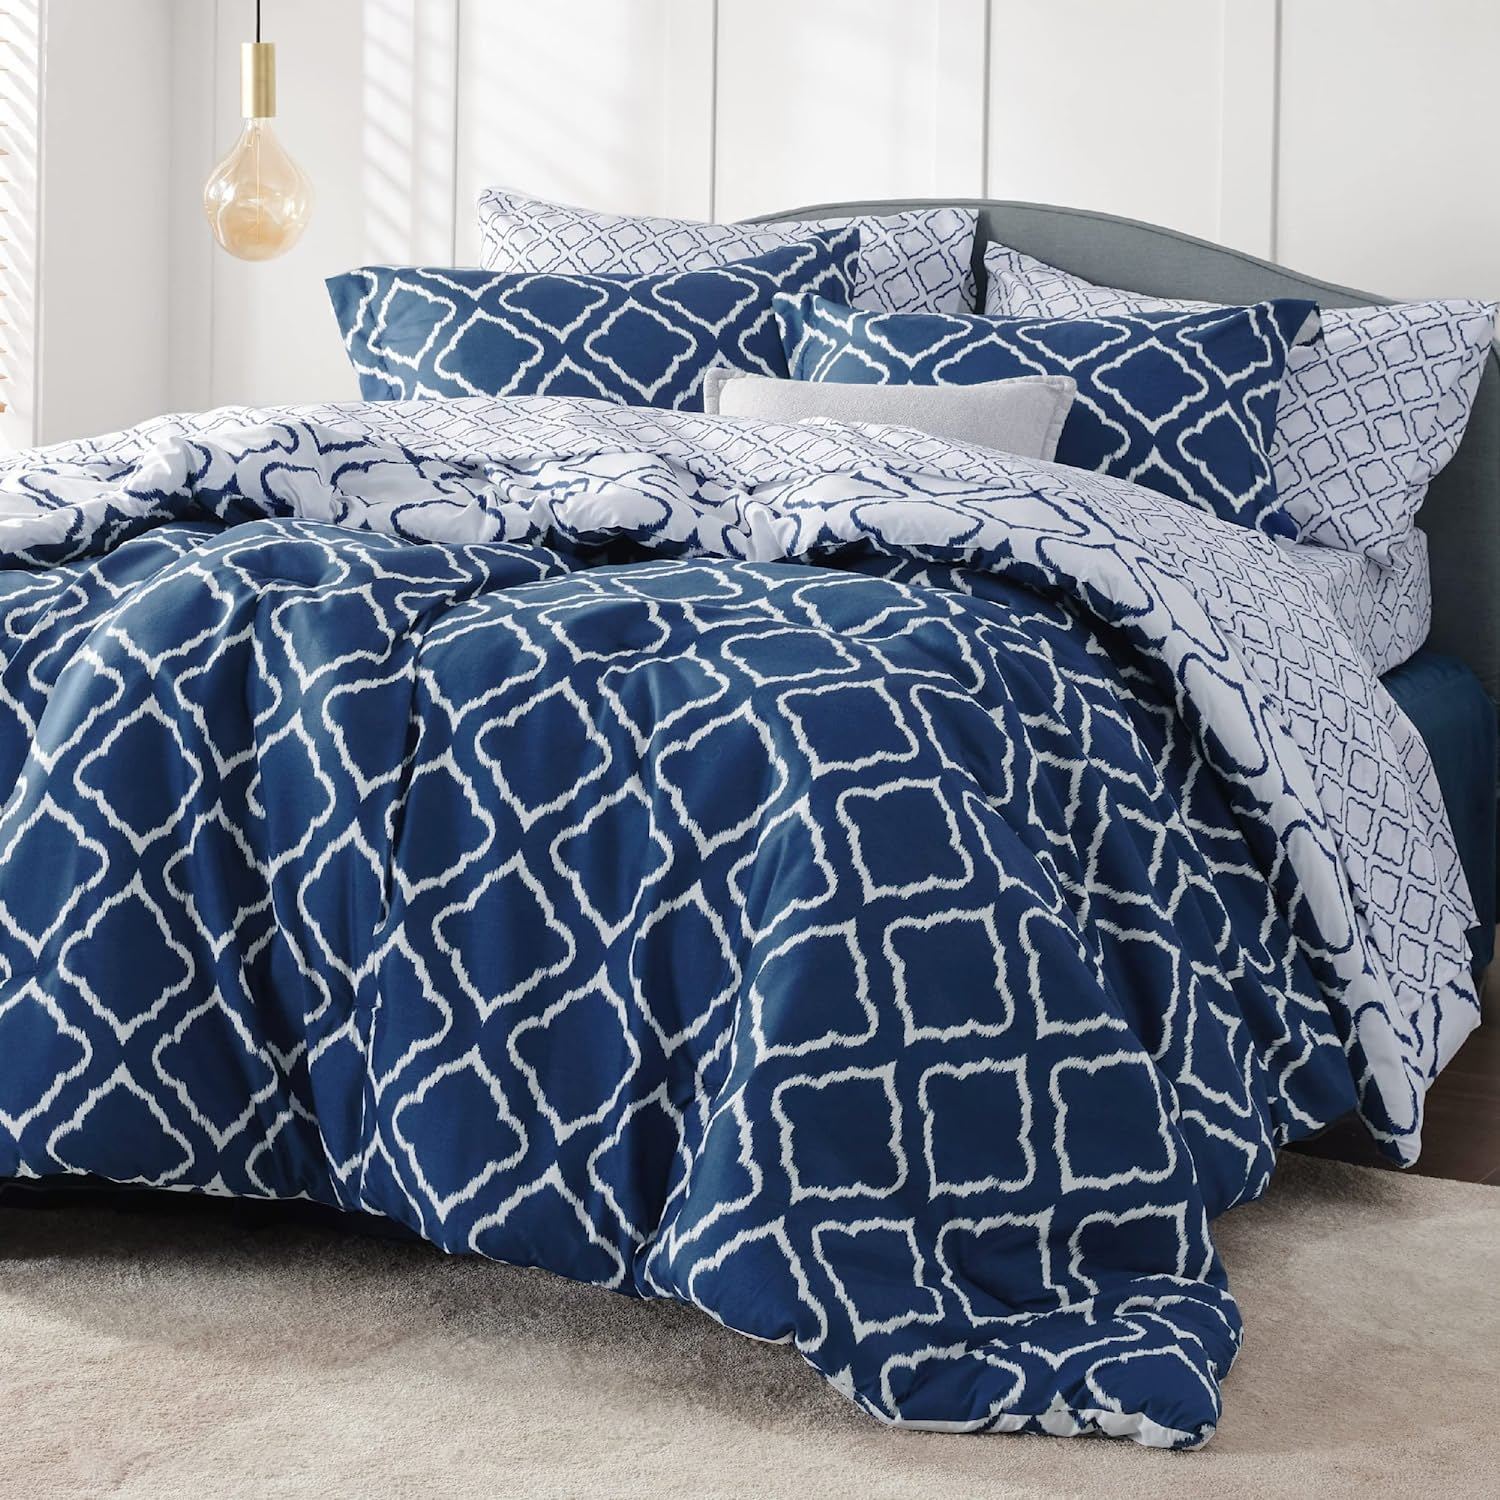 Bedsure Bed in A Bag - Full/Queen Bed Sets 8 Pieces,Queen Size, Navy Blue - $51.99